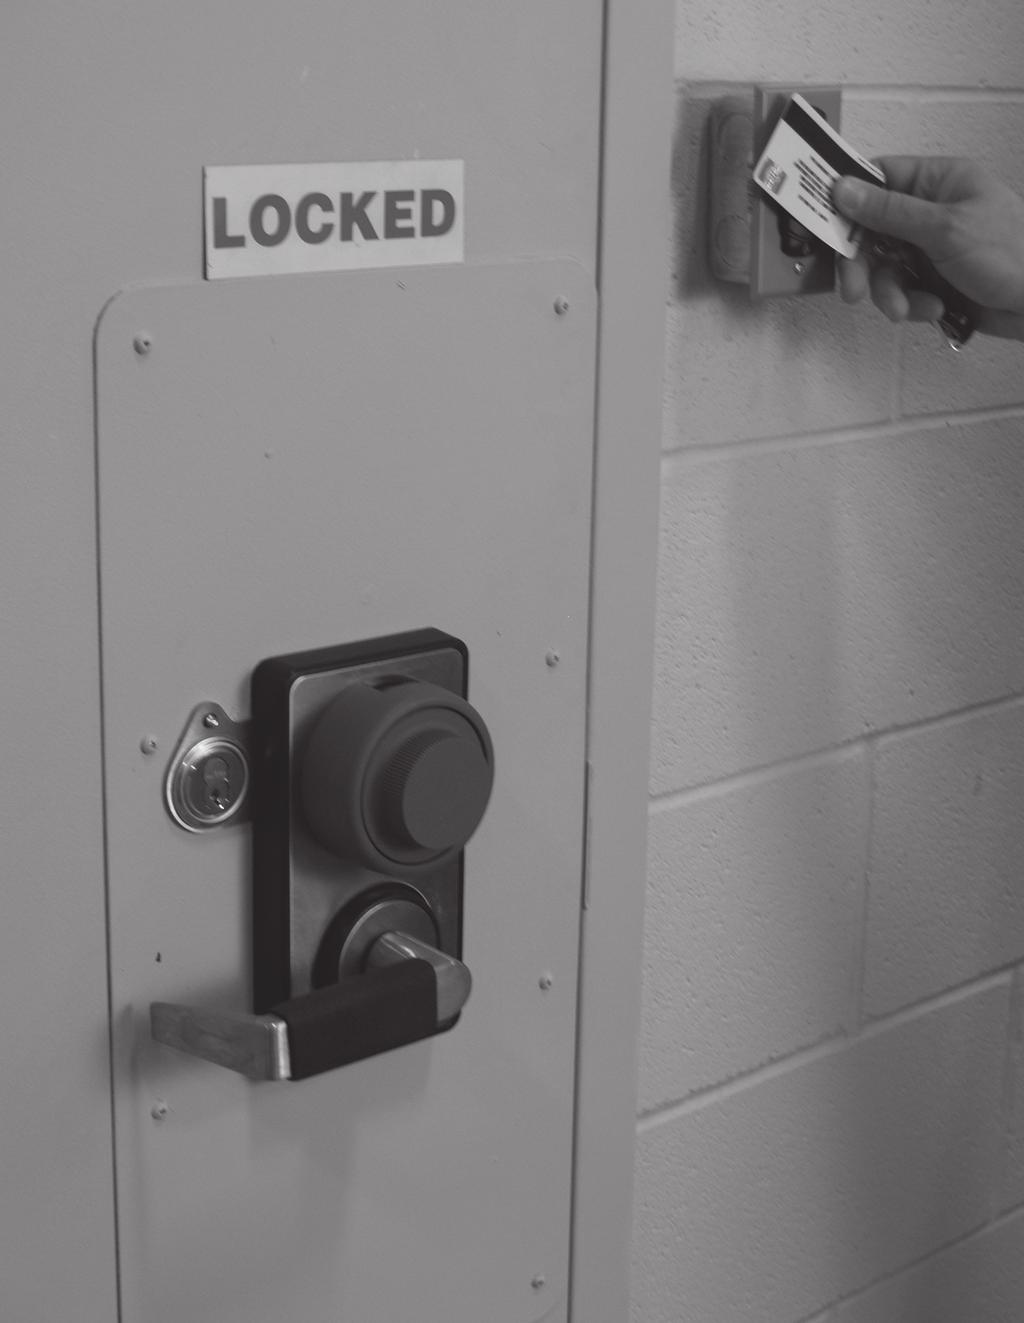 LKM7000 Lock Series This revolutionary locking device provides both high security and life safety.